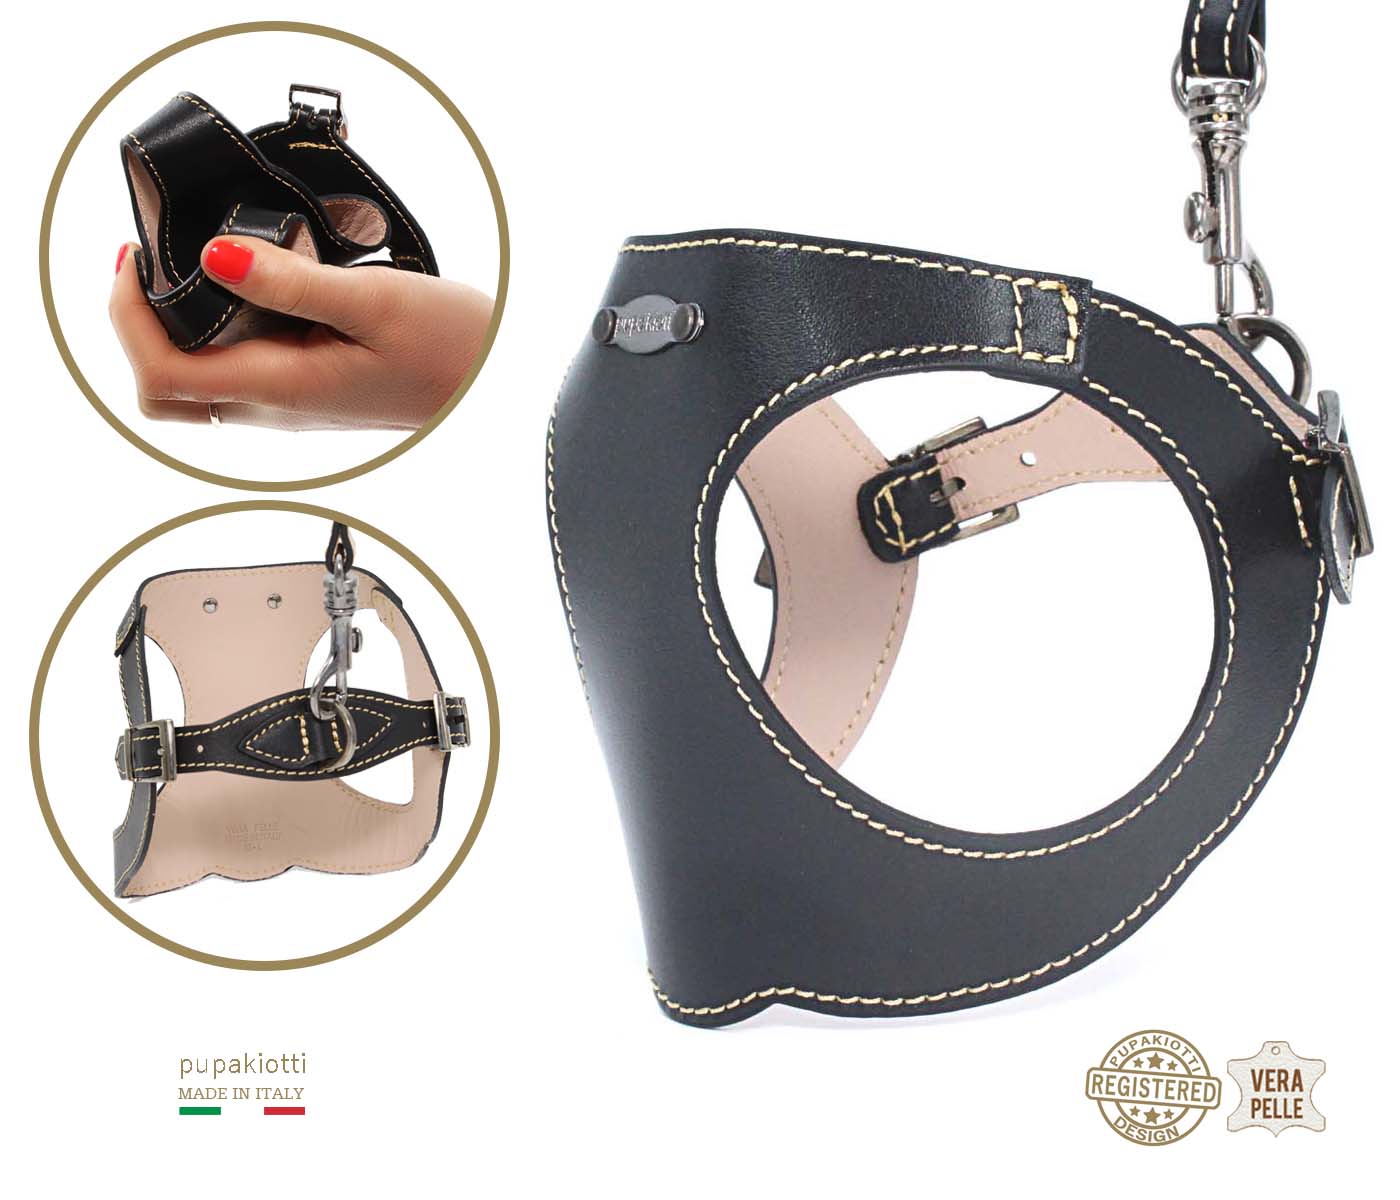 PREMIUM. SET 3 pieces. Leather harness and leash with poop bags dispenser for dog